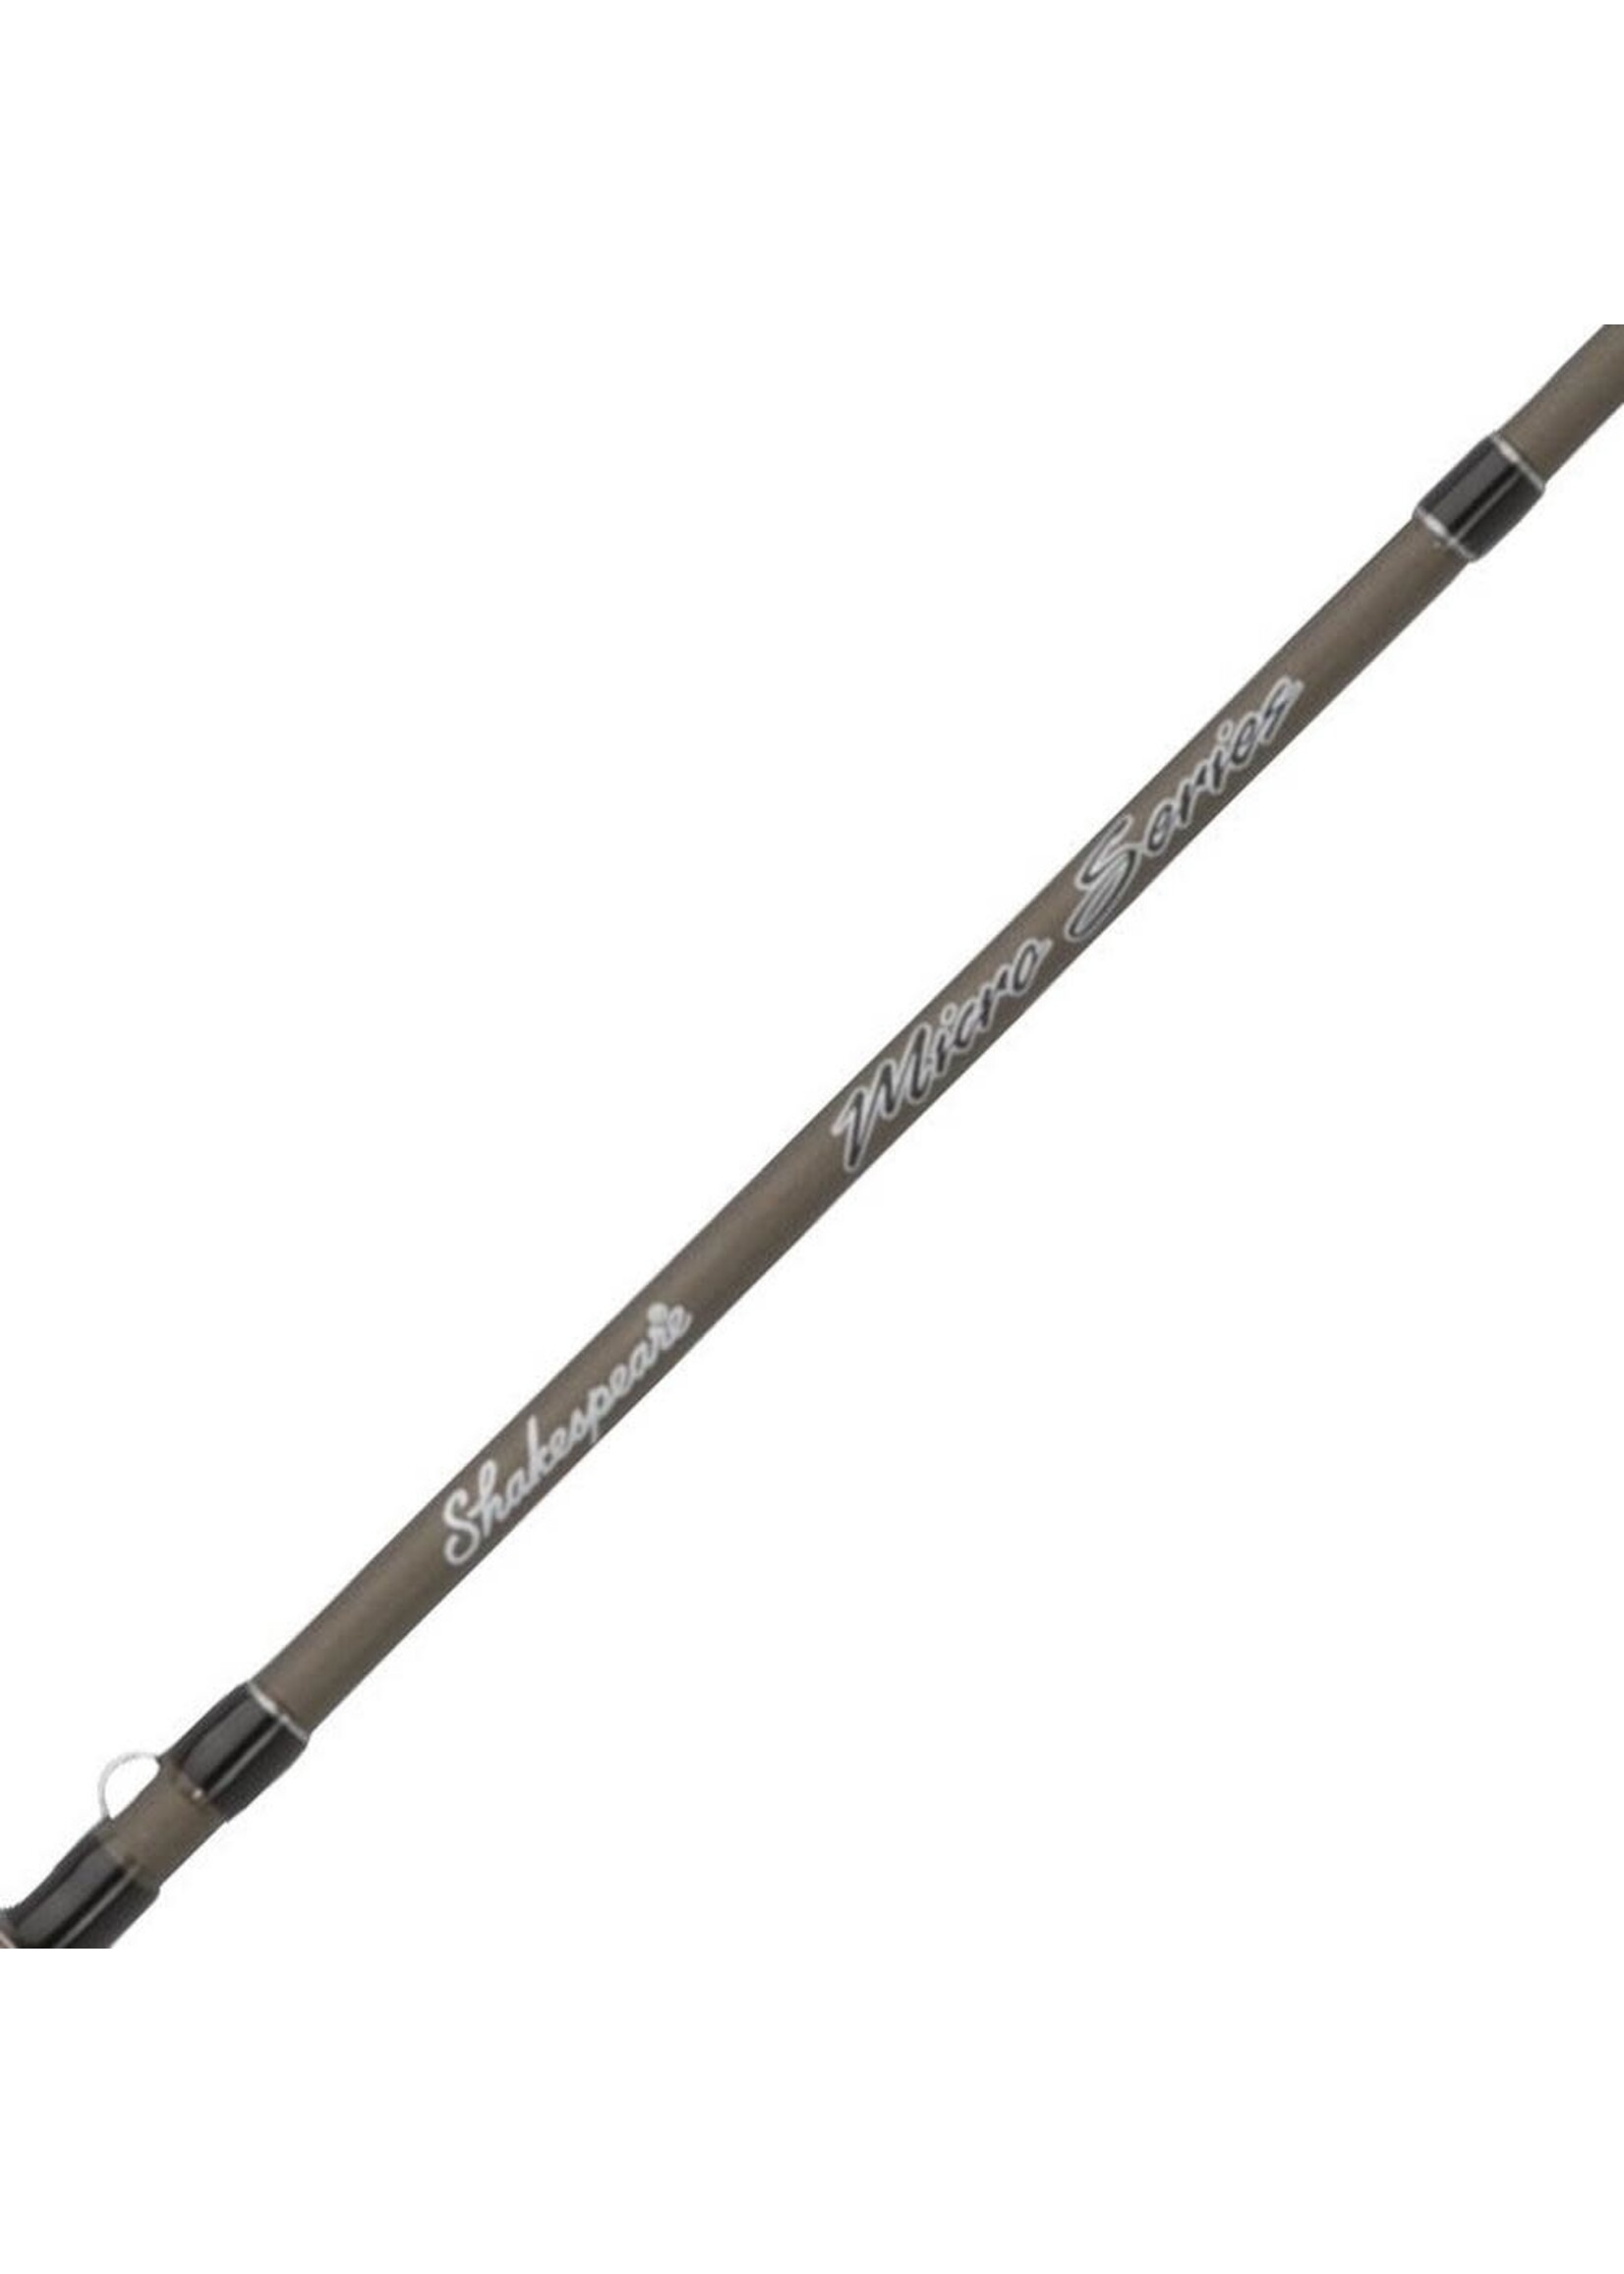 Shakespeare Micro Series Spinning Combo - Tackle Shack